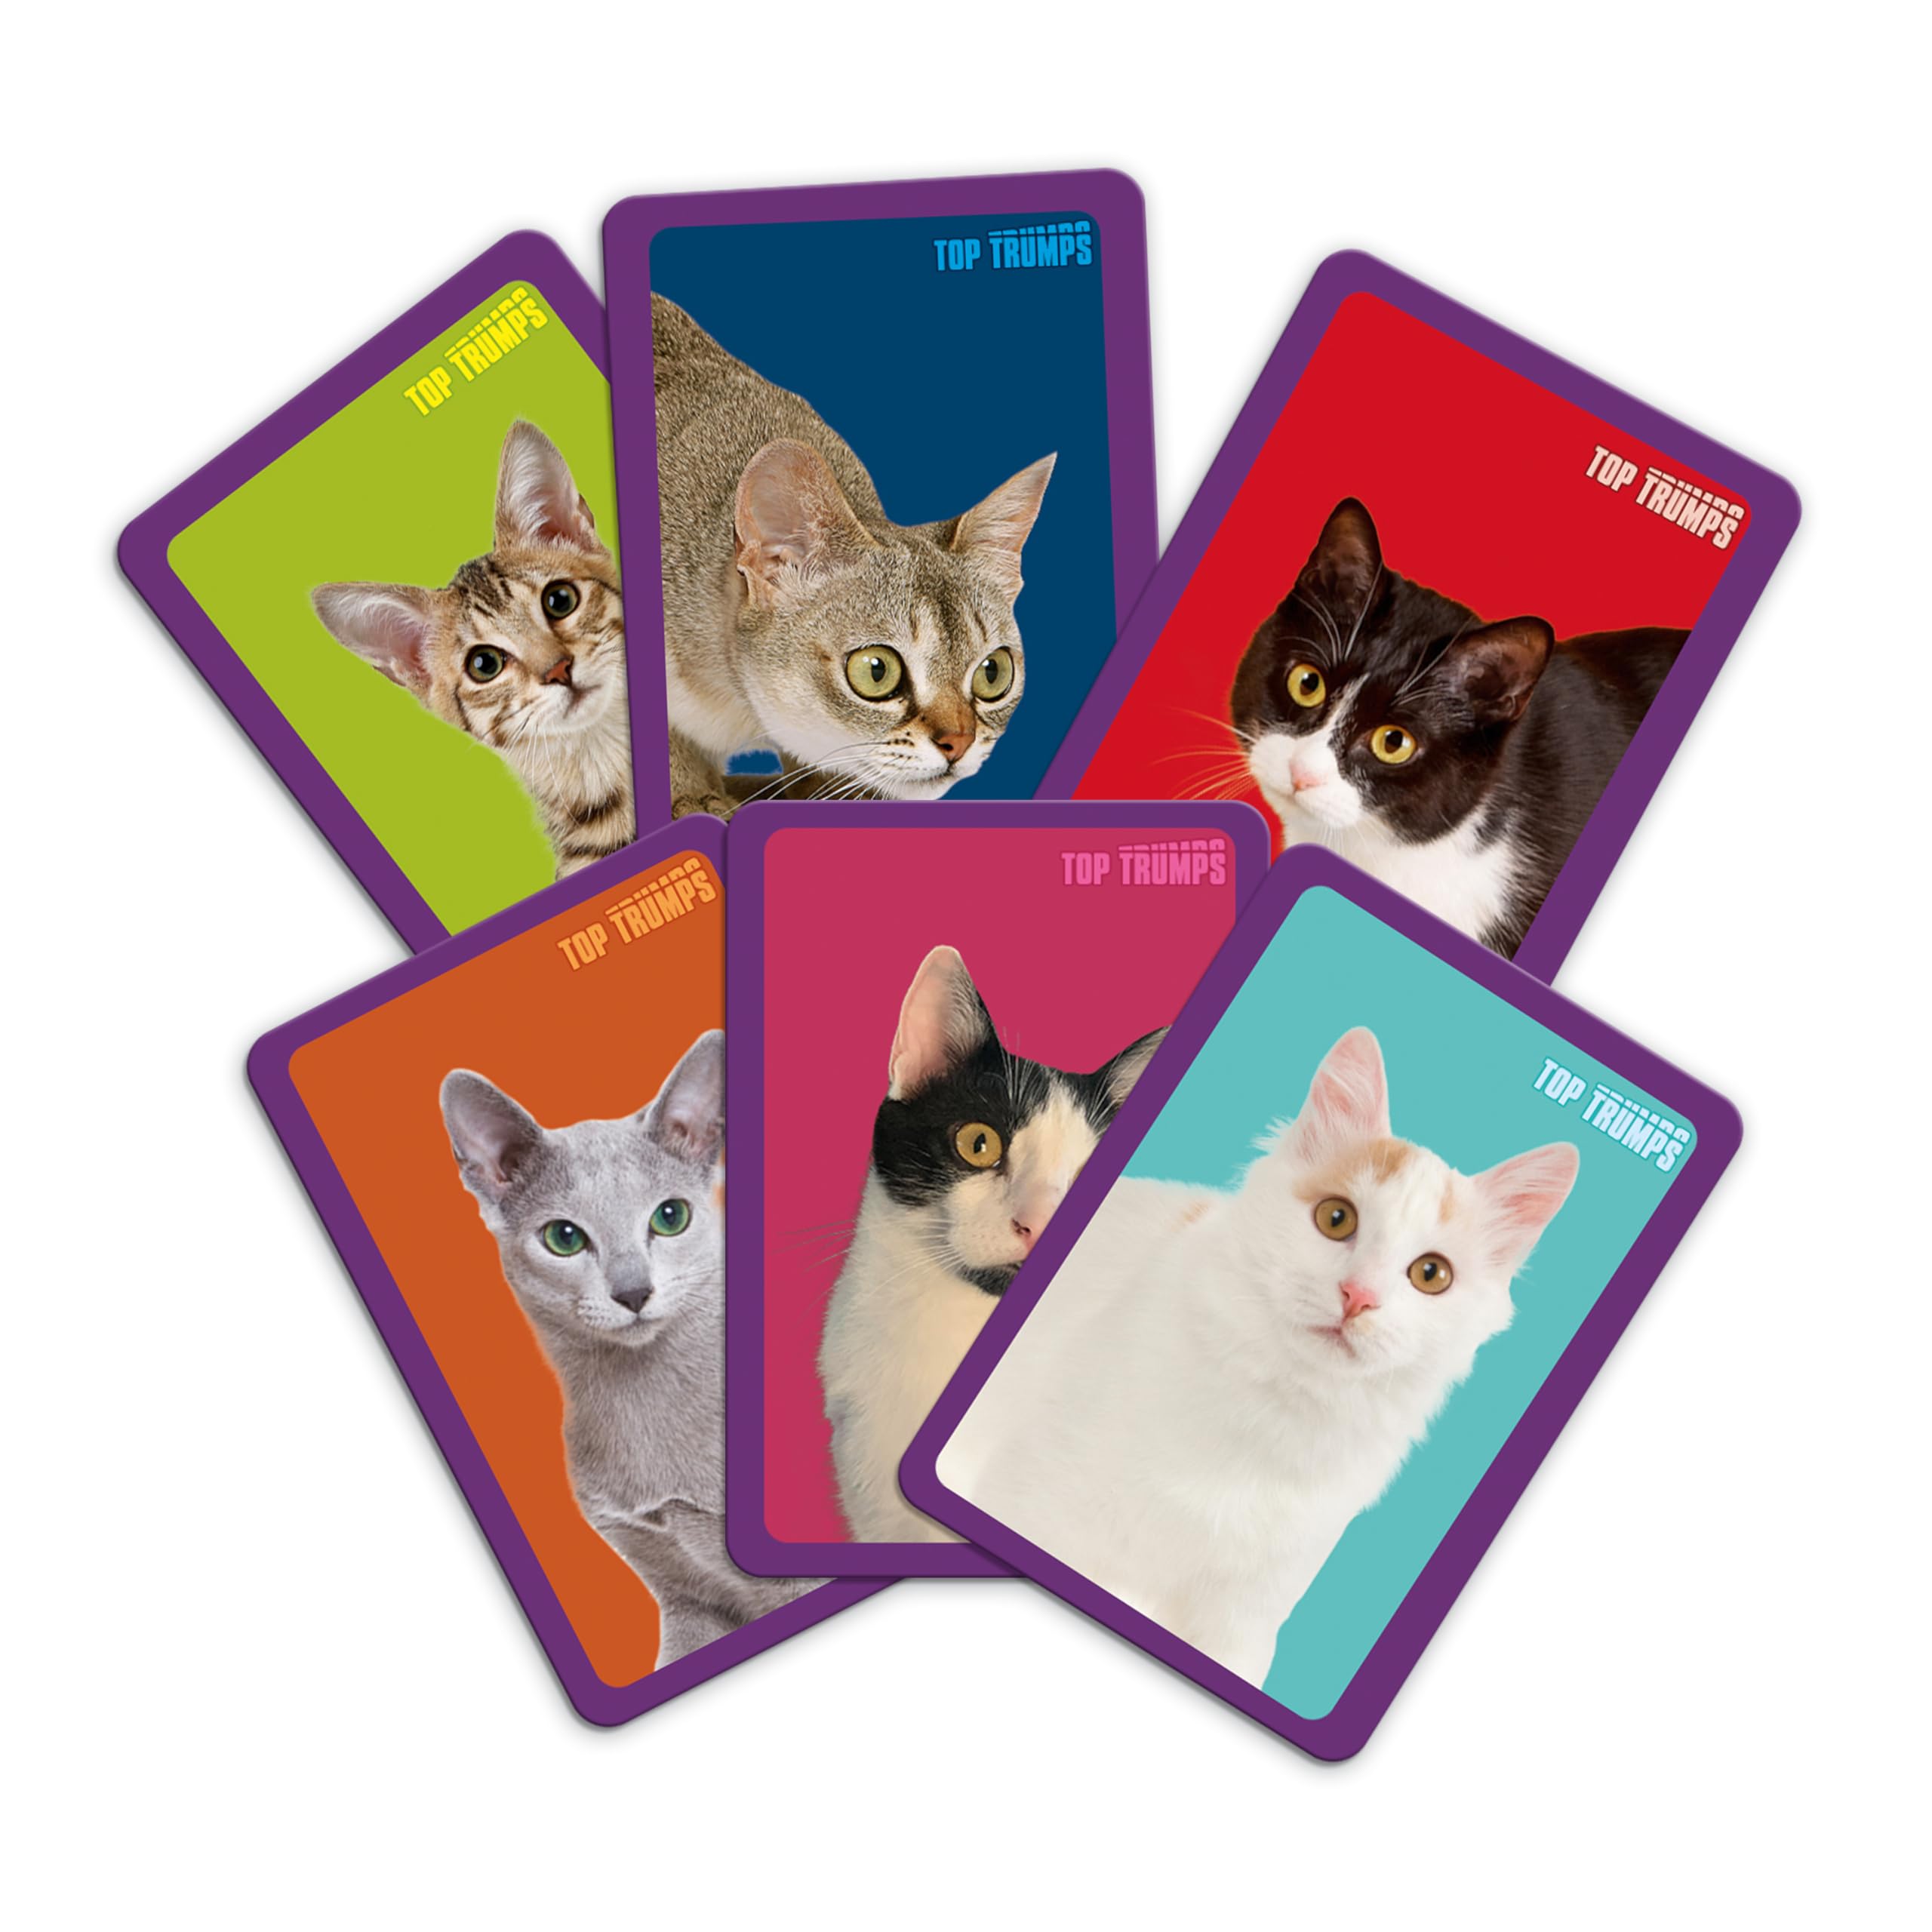 Cats Top Trumps Match Board Game; Matching Cube Game with Kitties Like ragdolls, Manx, and More Family Game for Ages 4 and up